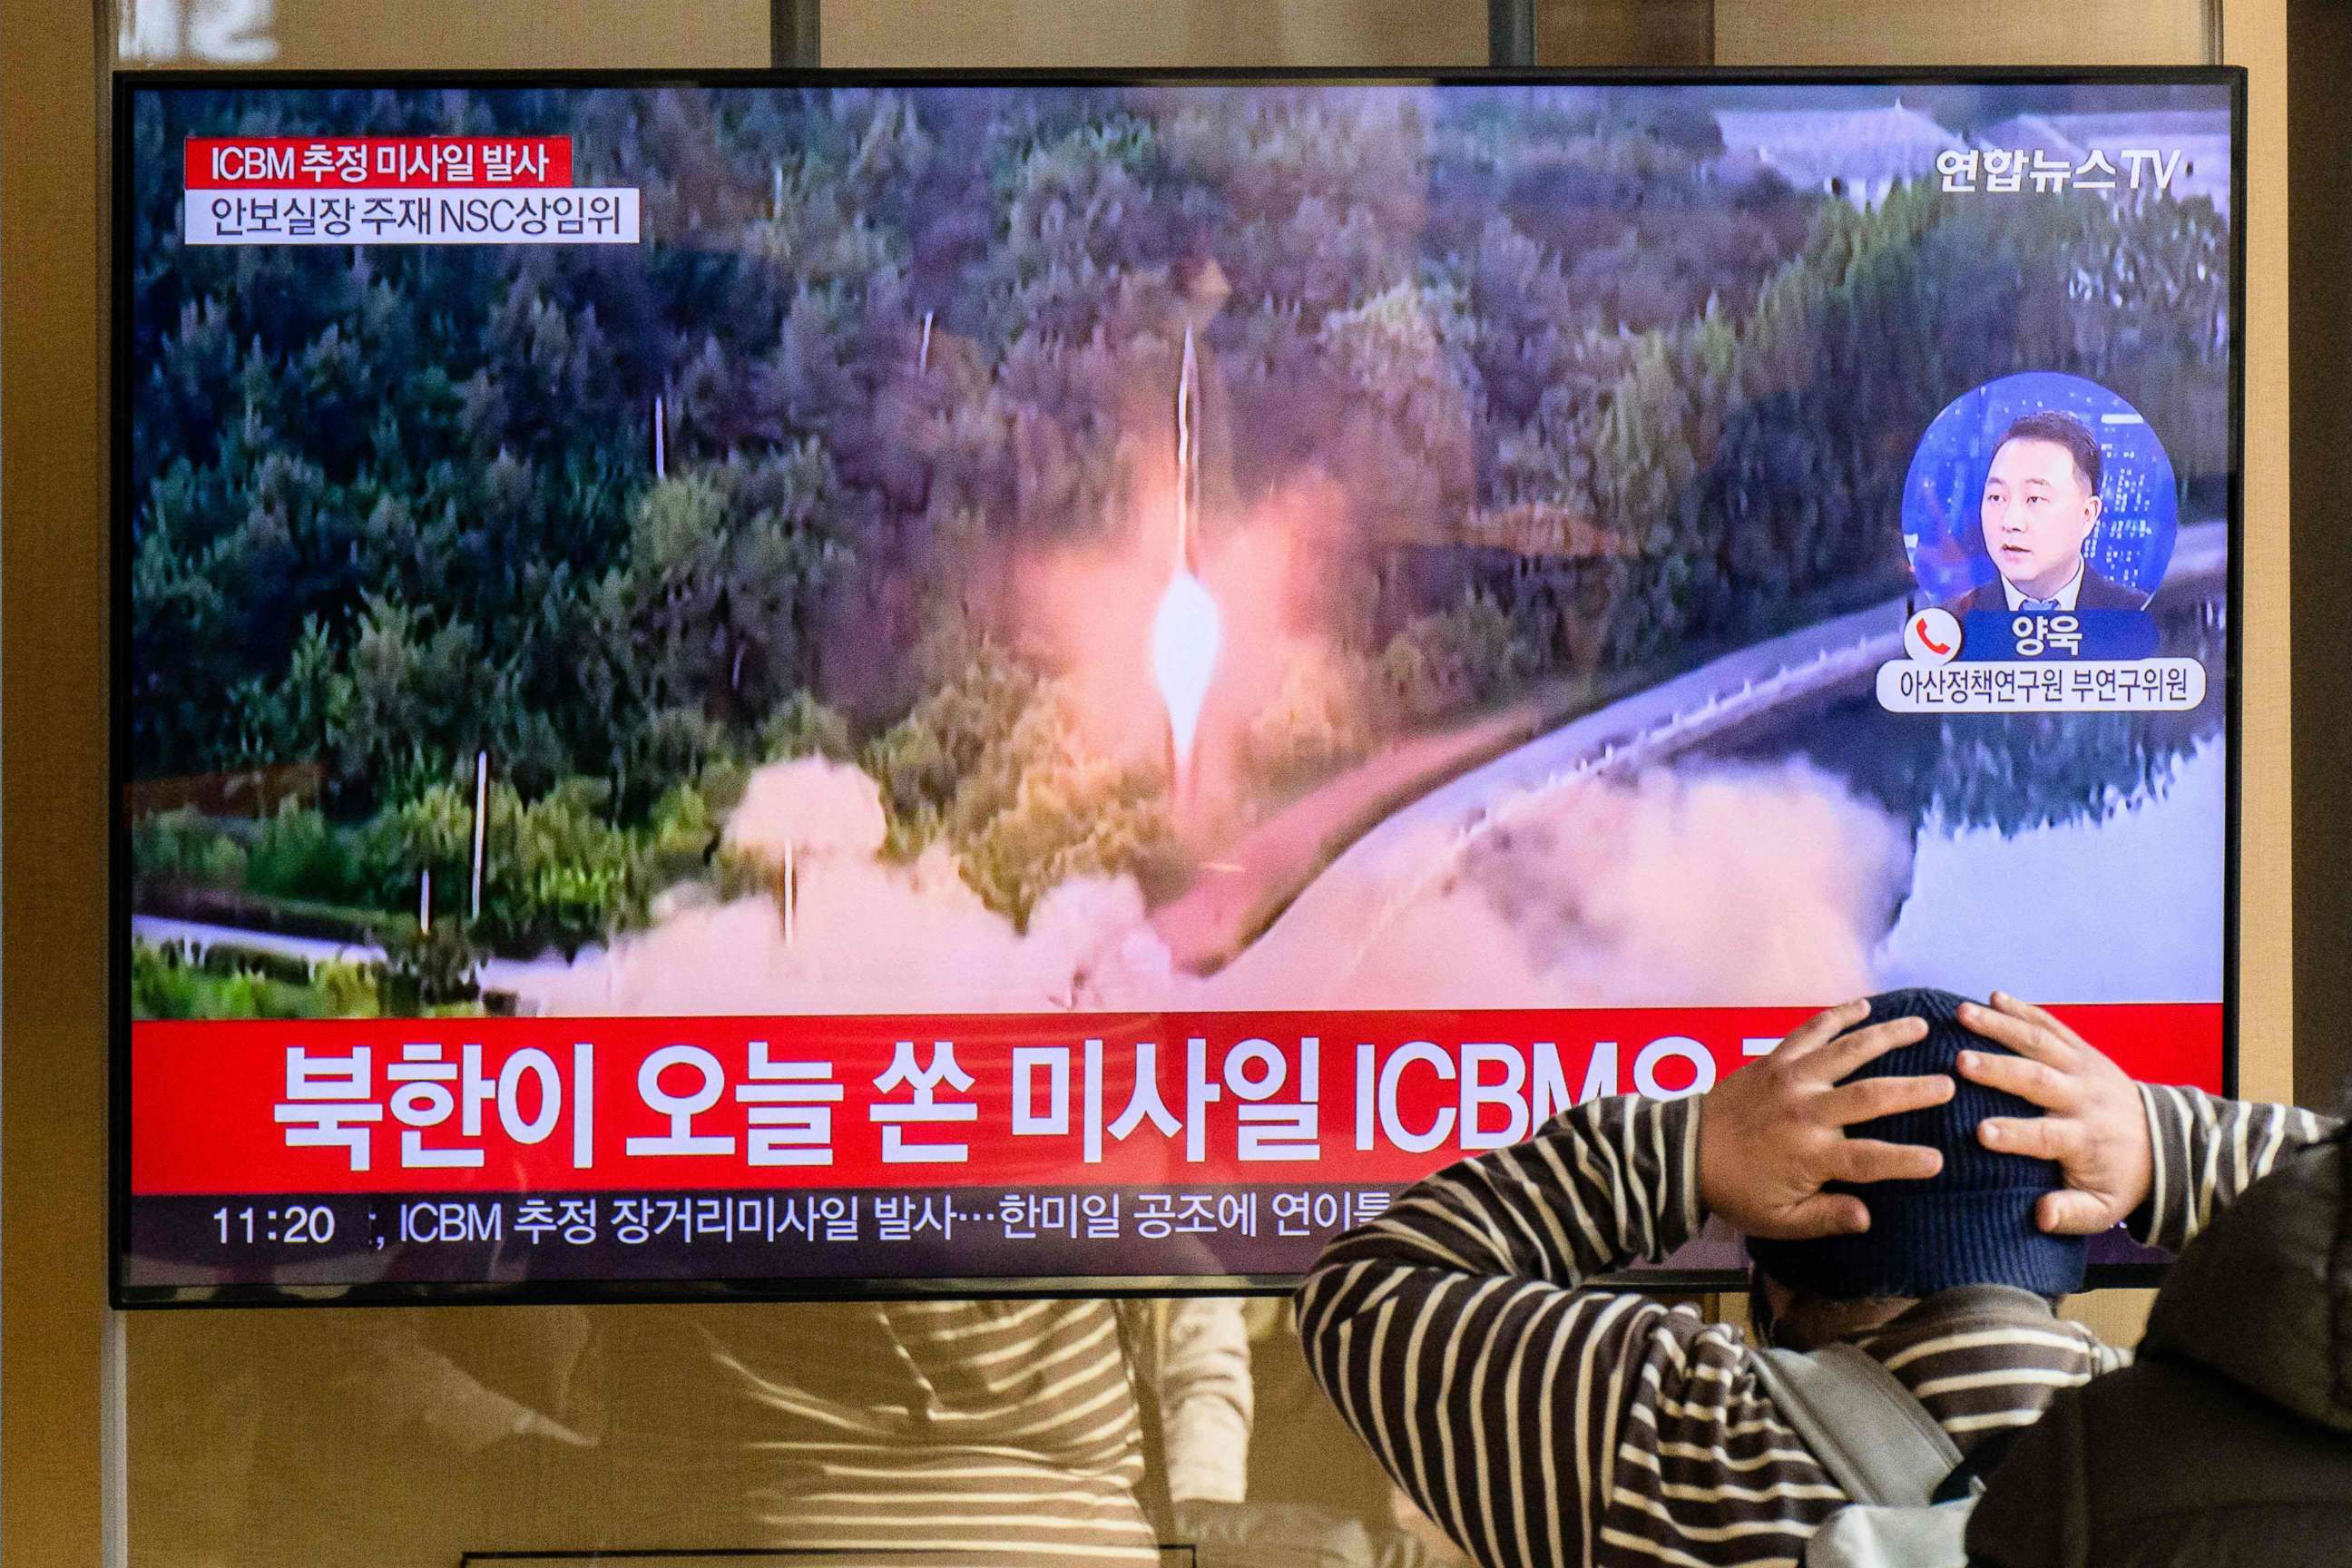 PHOTO: TOPSHOT - A man watches a television showing a news broadcast with file footage of a North Korean missile test, at a railway station in Seoul on November 18, 2022.